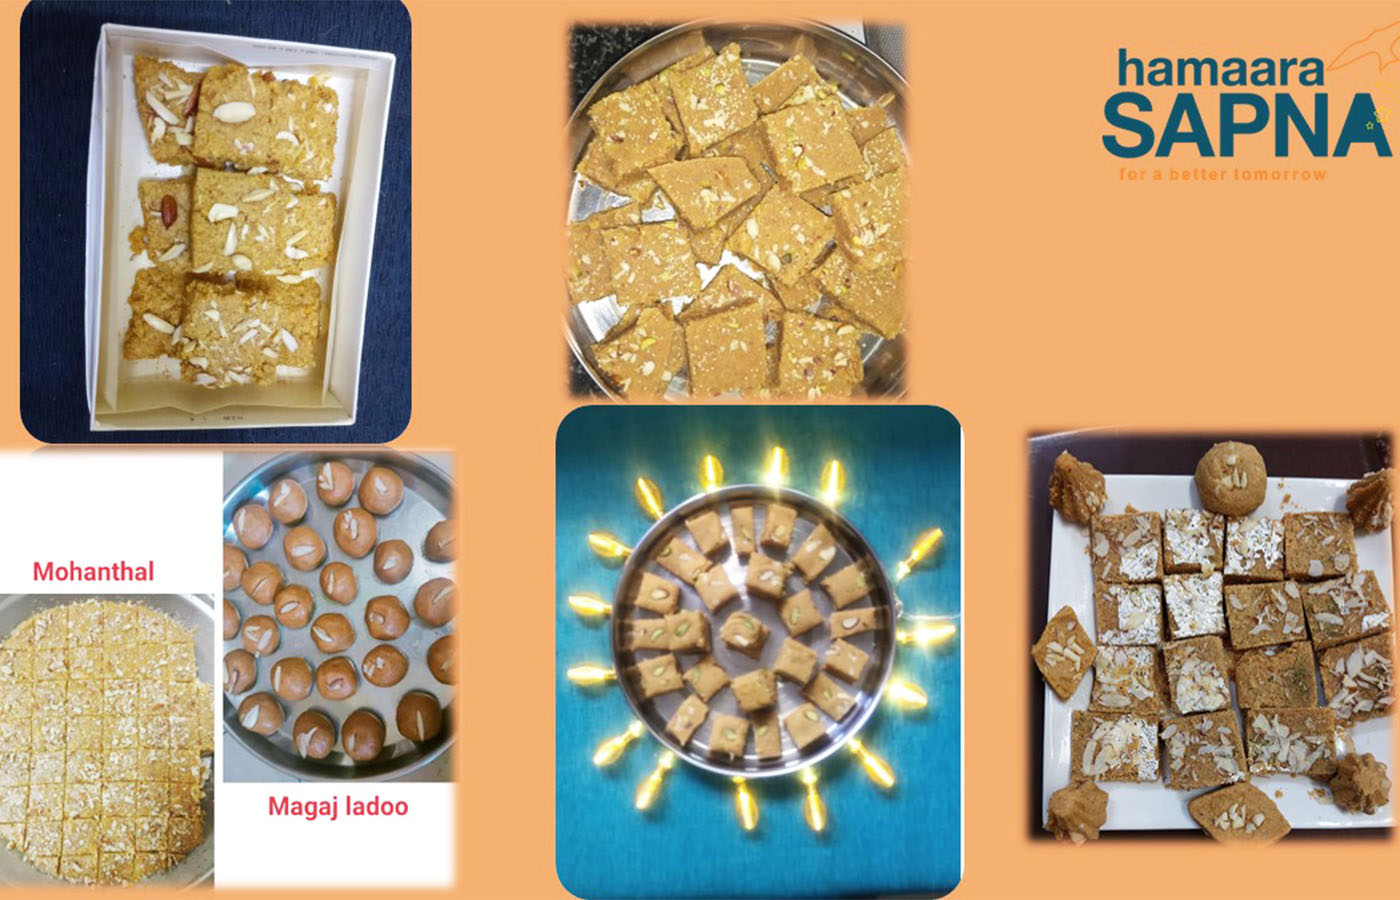 Our Diwali sweets are ready to be served in a platter, garnished with Badam, Kaju and other dry fruits